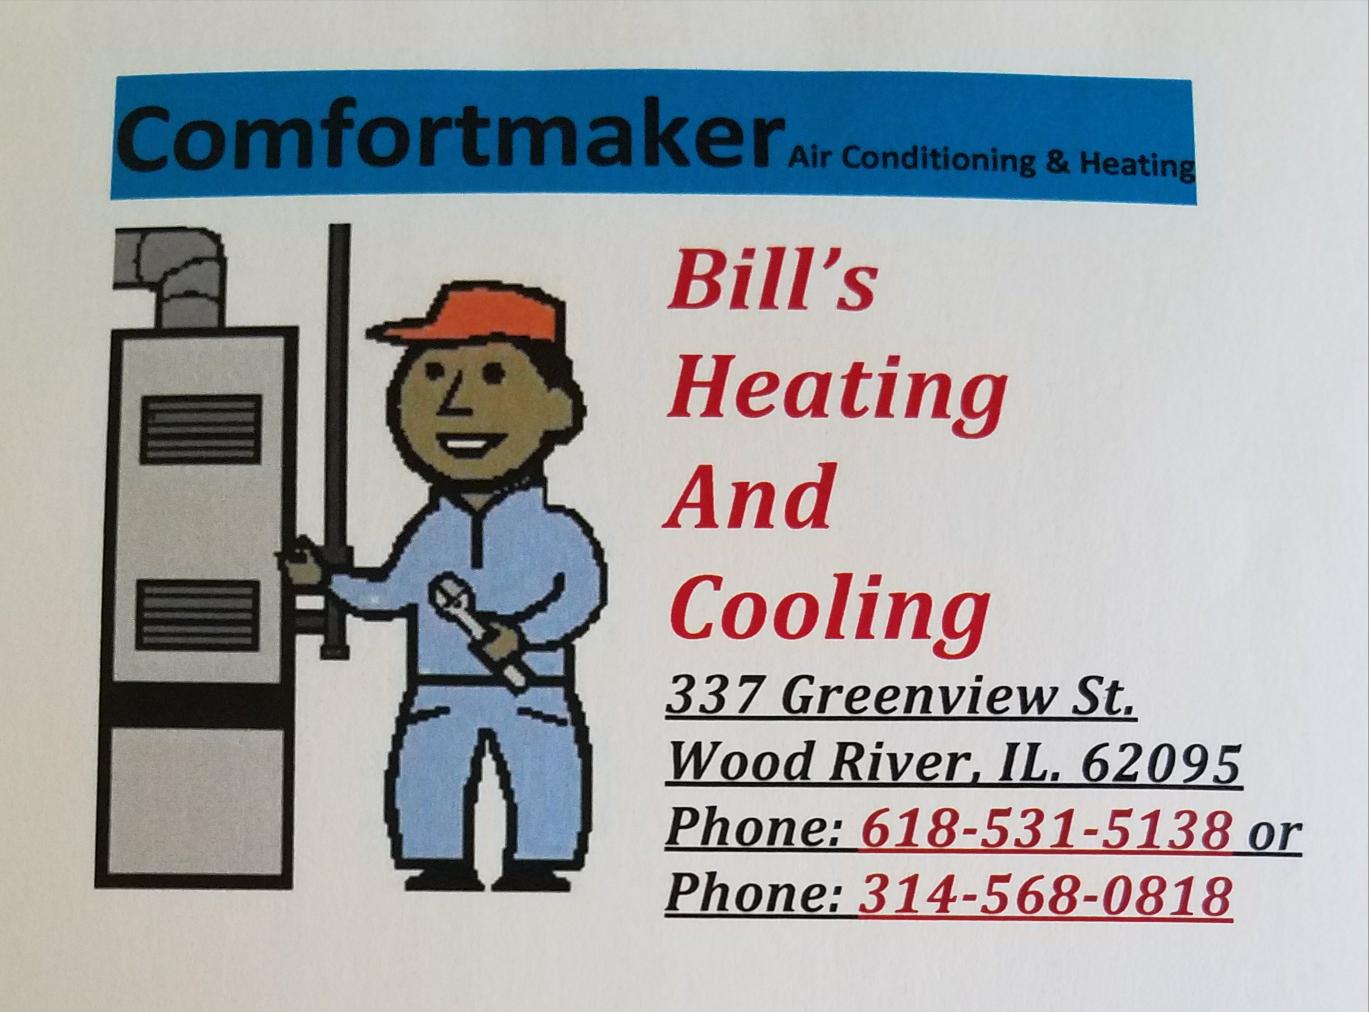 Bill's Heating & Cooling